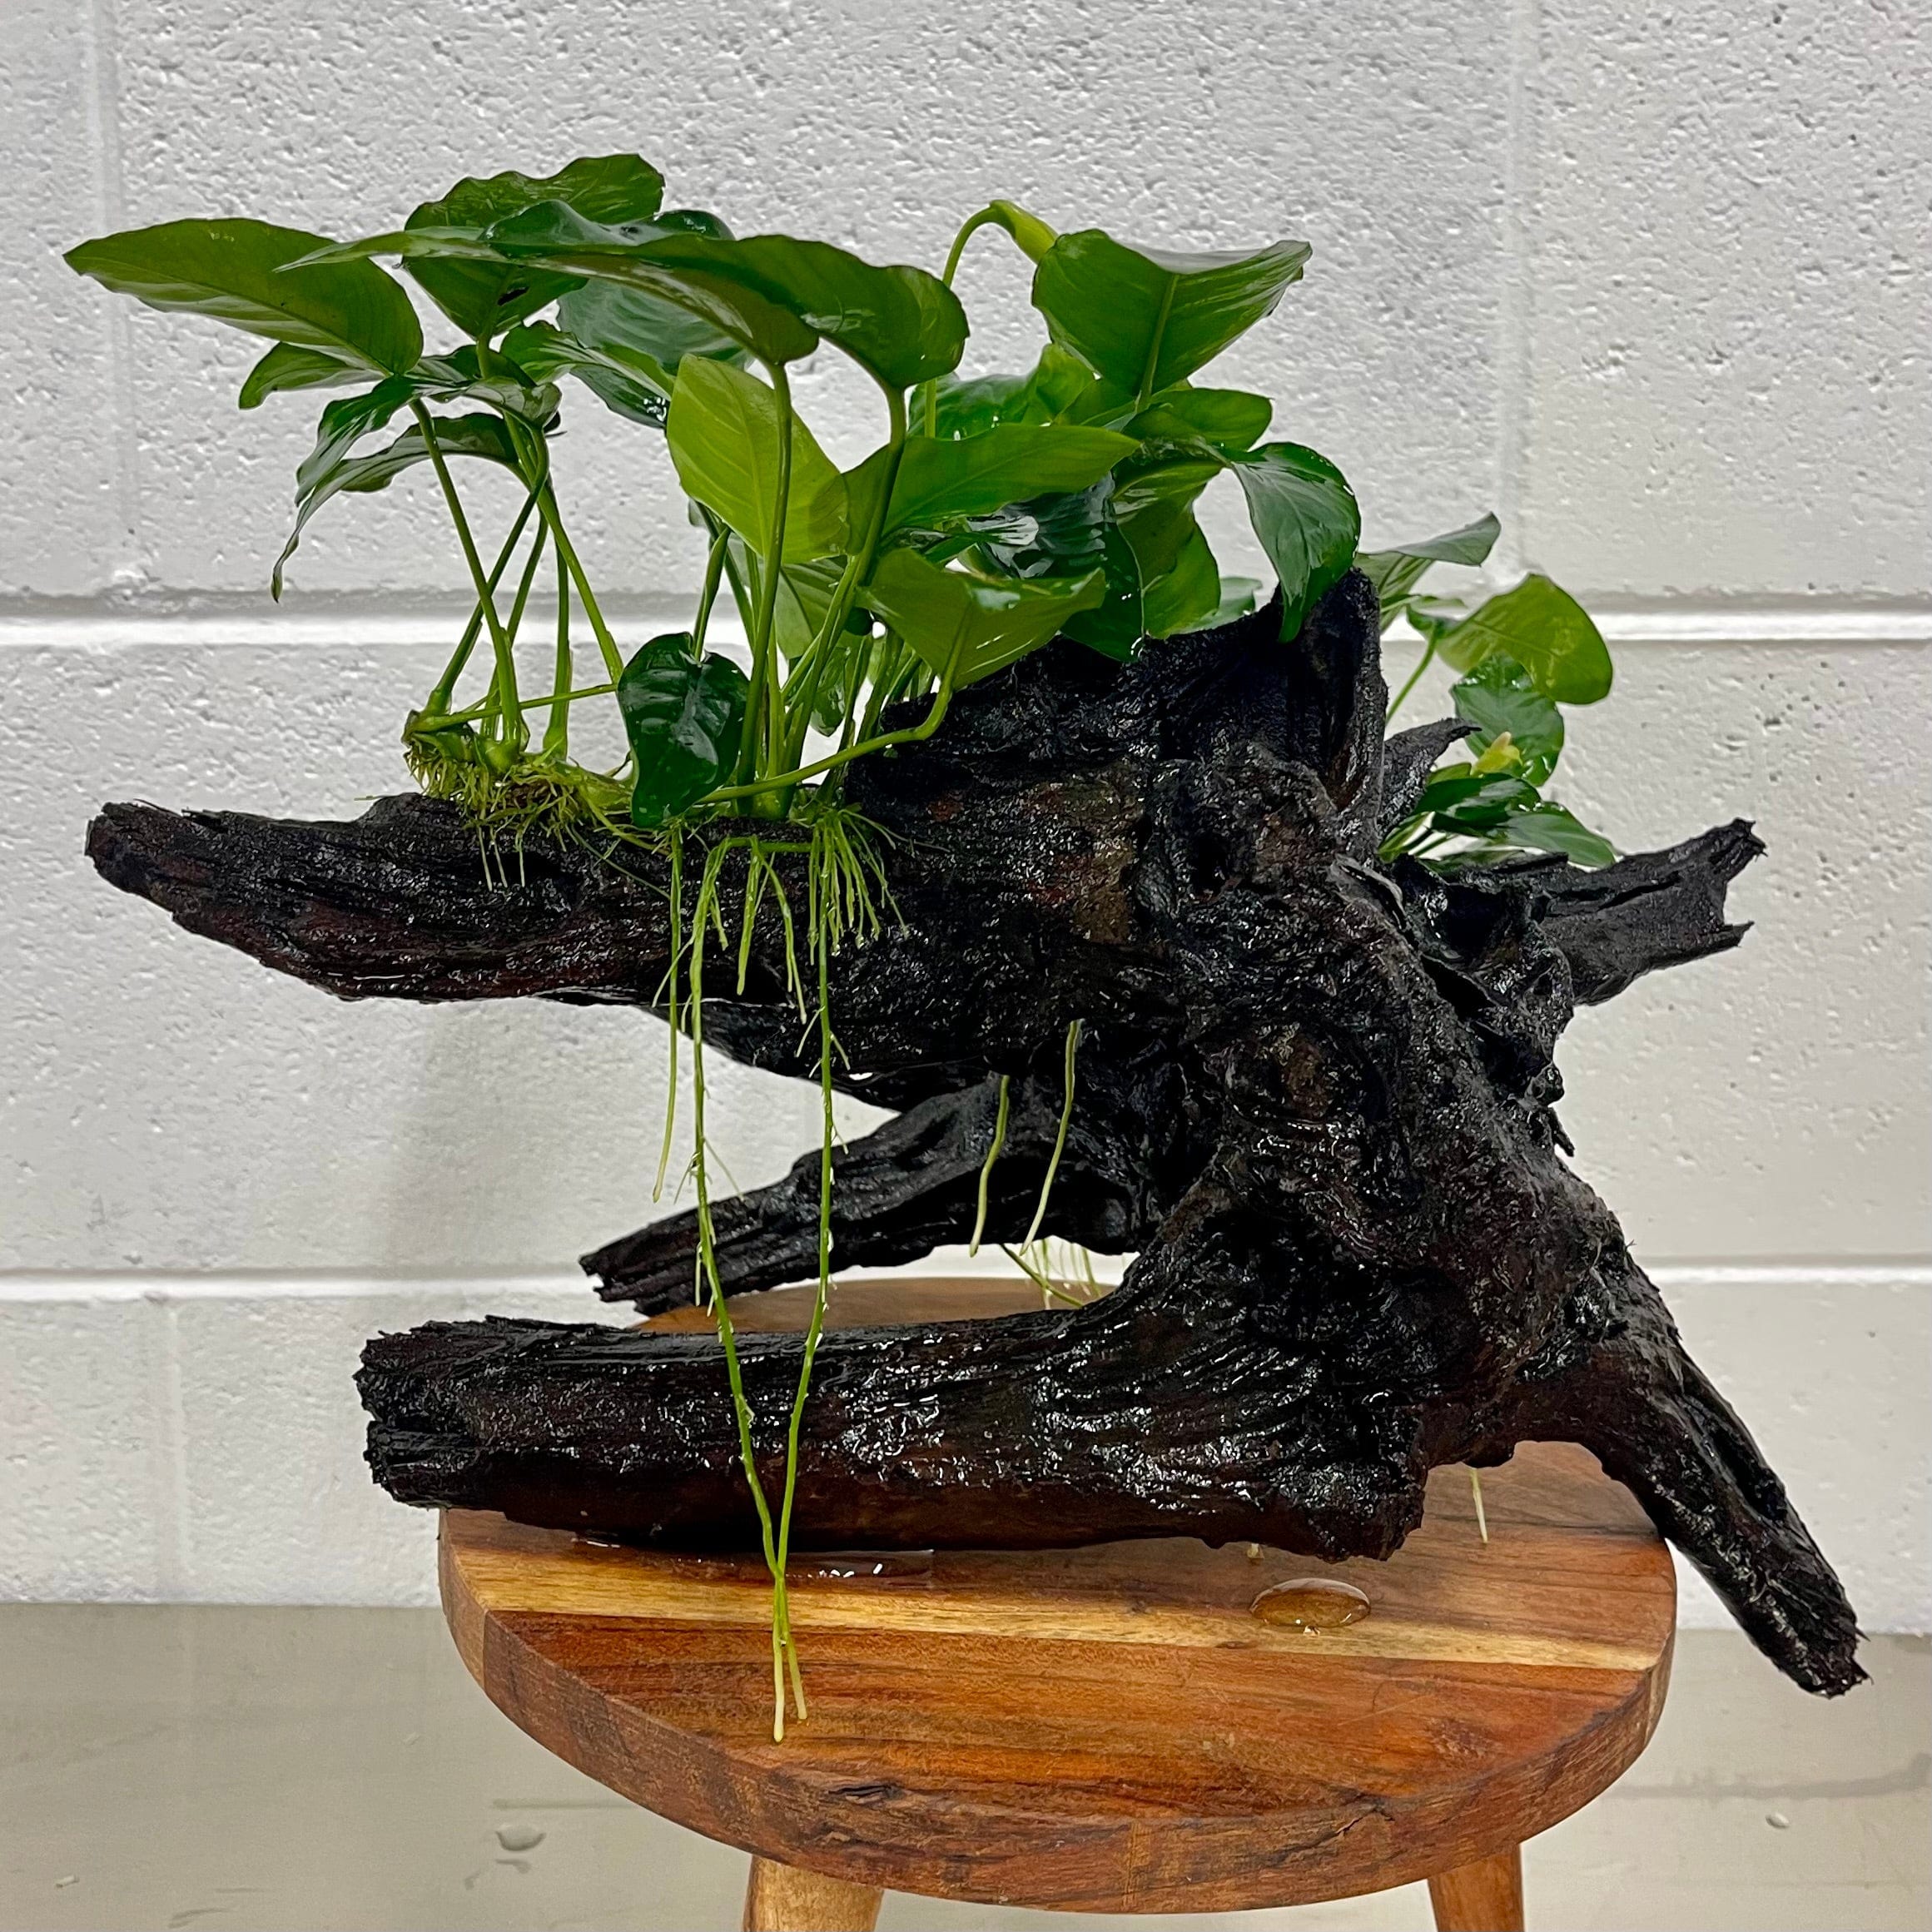 Pisces Enterprises Driftwood Creation Double Anubias 'Nana' on Extra-Large Driftwood Creation - One Only - A